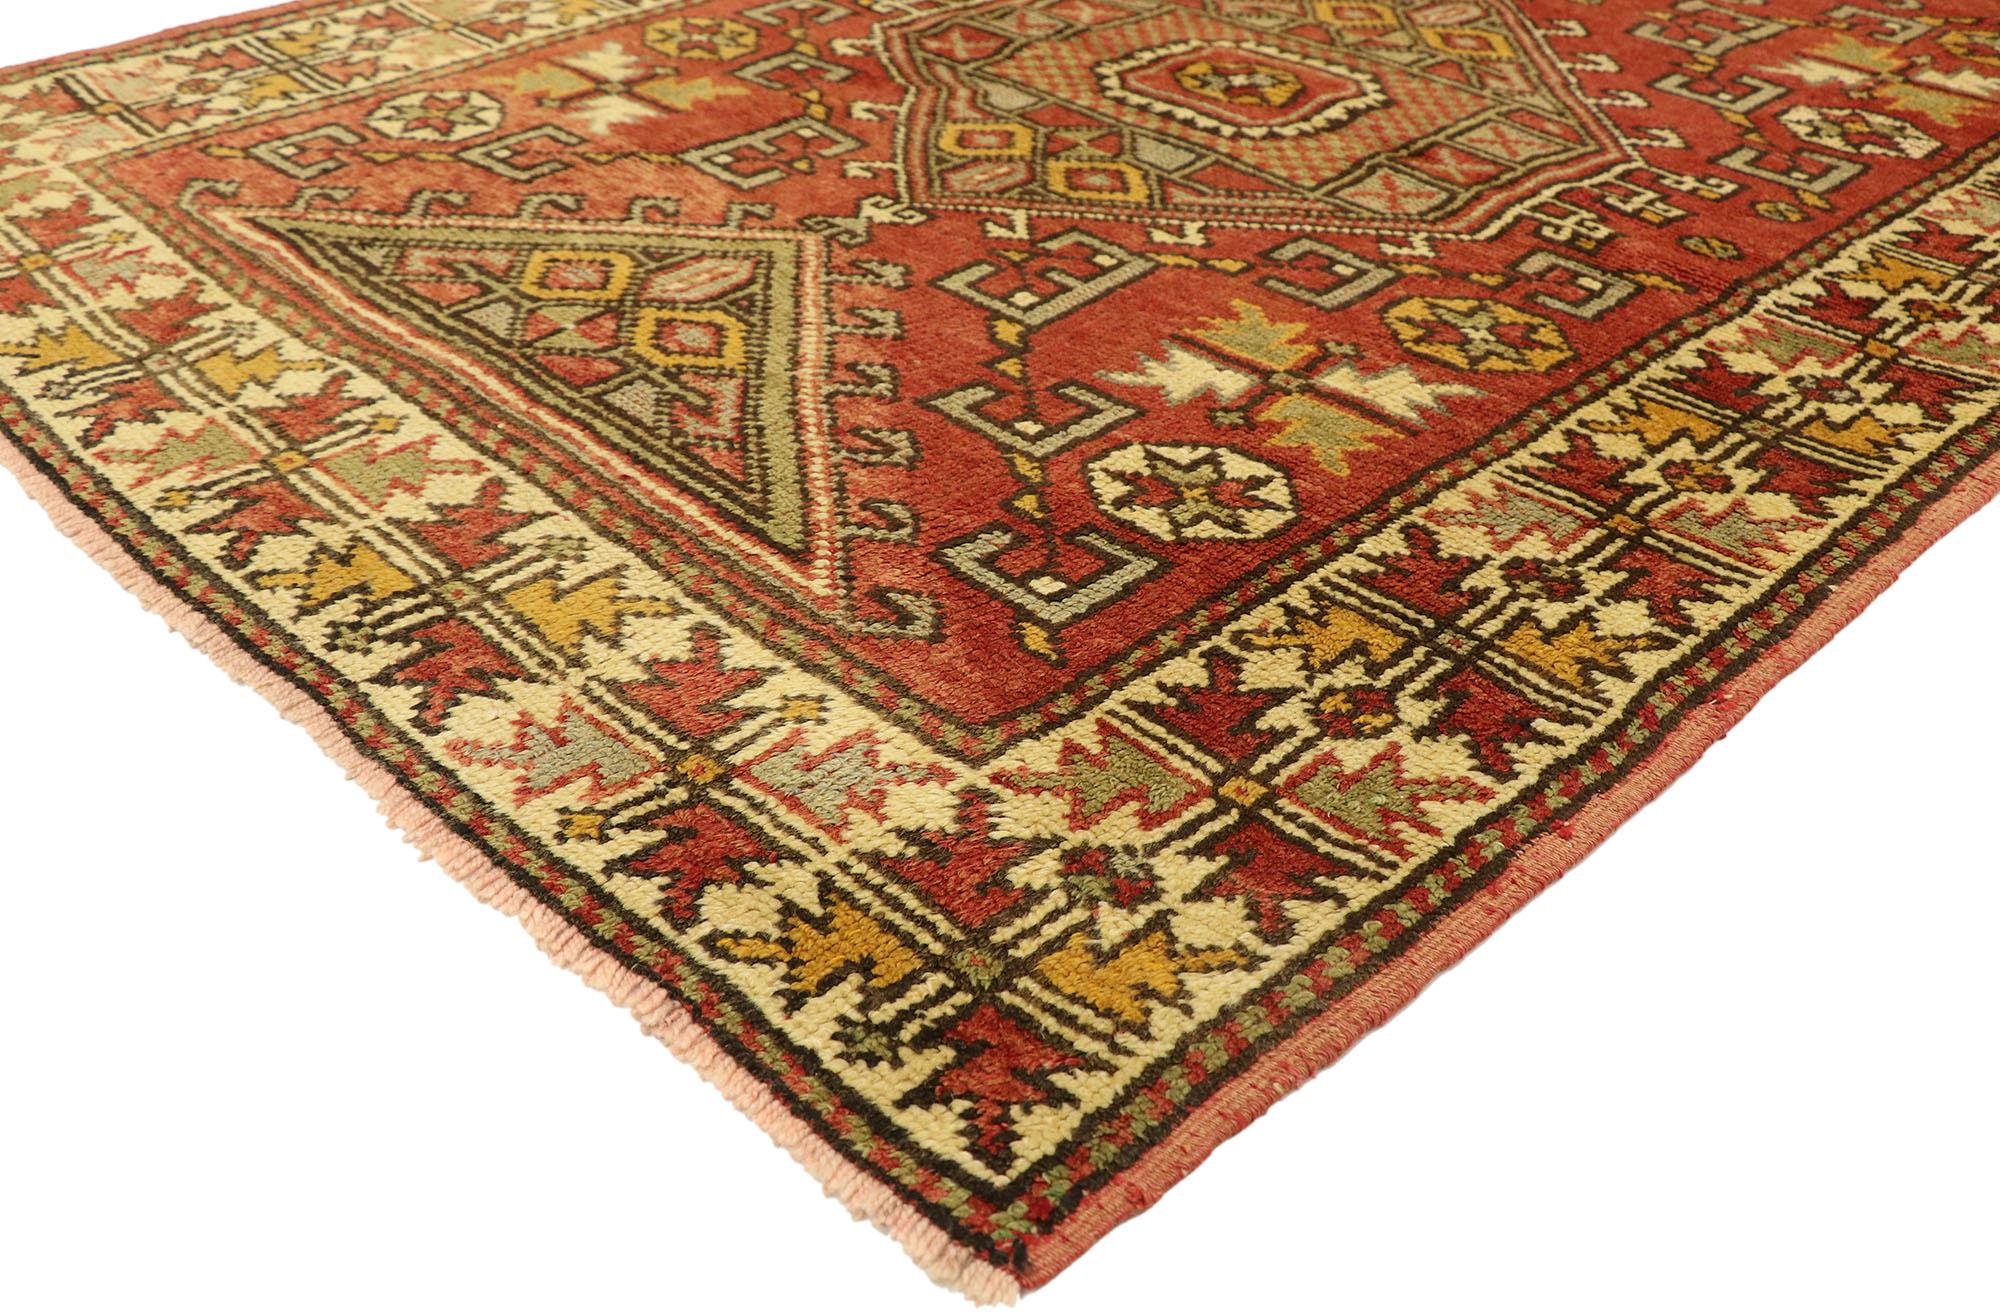 51080, Vintage Turkish Oushak Rug with Bungalow Style. With its rustic Bungalow style and warm earth-tone colors, this hand knotted wool vintage Turkish Oushak gallery rug astounds with its beauty. The abrashed brick red field features one large